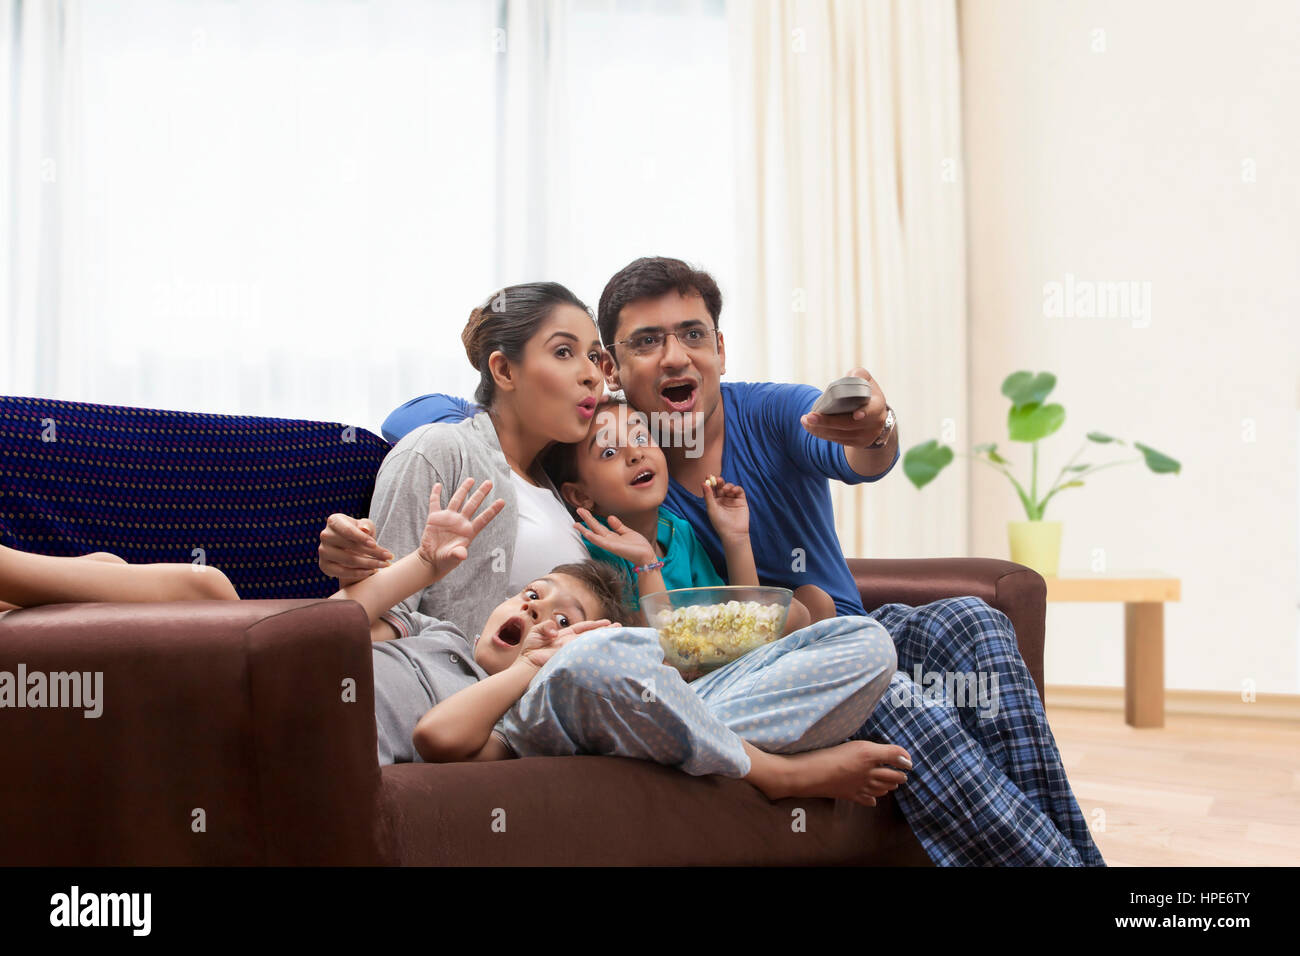 Family in pyjamas watching TV and eating popcorn Stock Photo